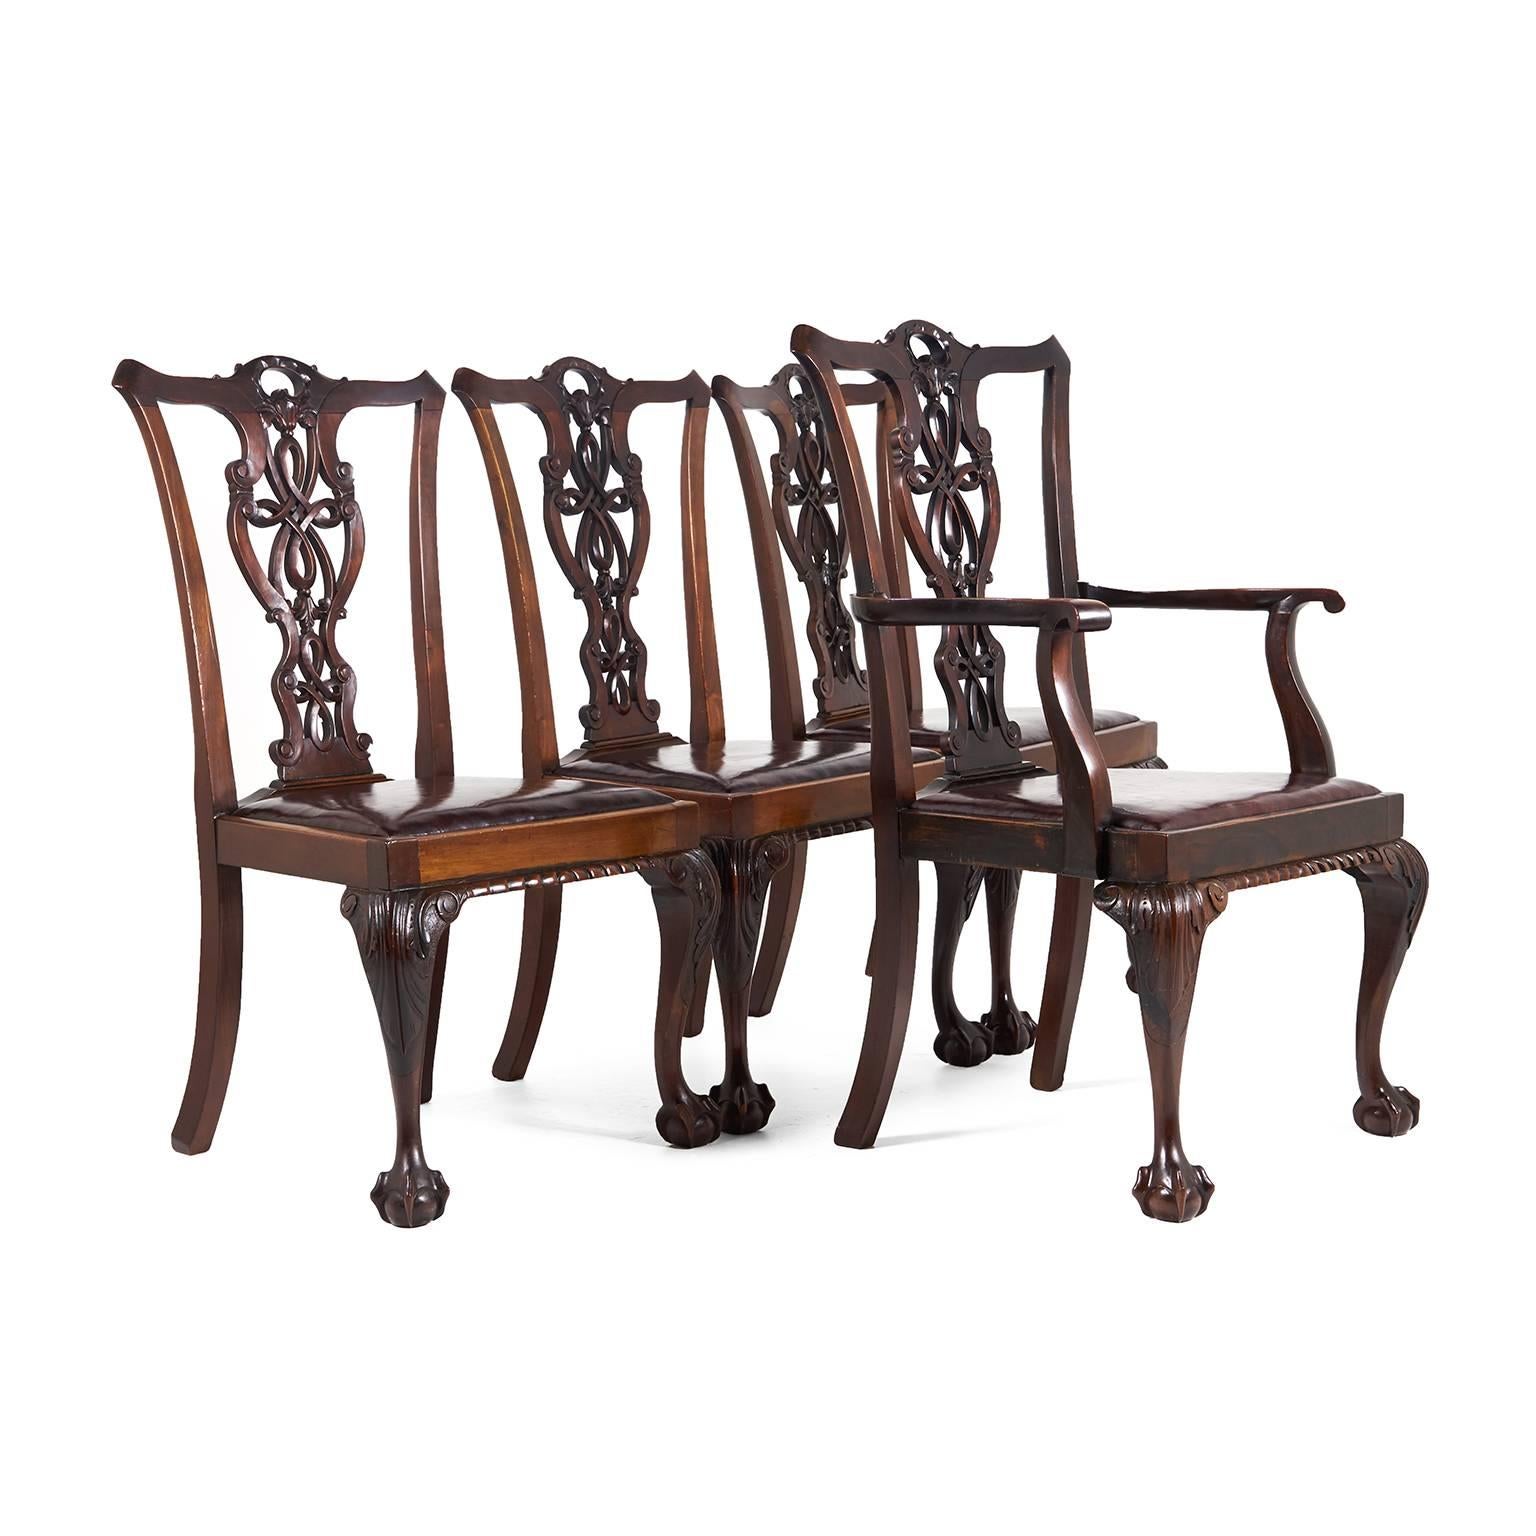 A set of excellent quality Chippendale-Revival ‘ribbon back’ dining chairs in mahogany.

Three side chairs; one armchair. English, circa 1900. Gorgeous patina on these pieces, and they're sturdy enough for everyday use.

Measures: Sides: 23?